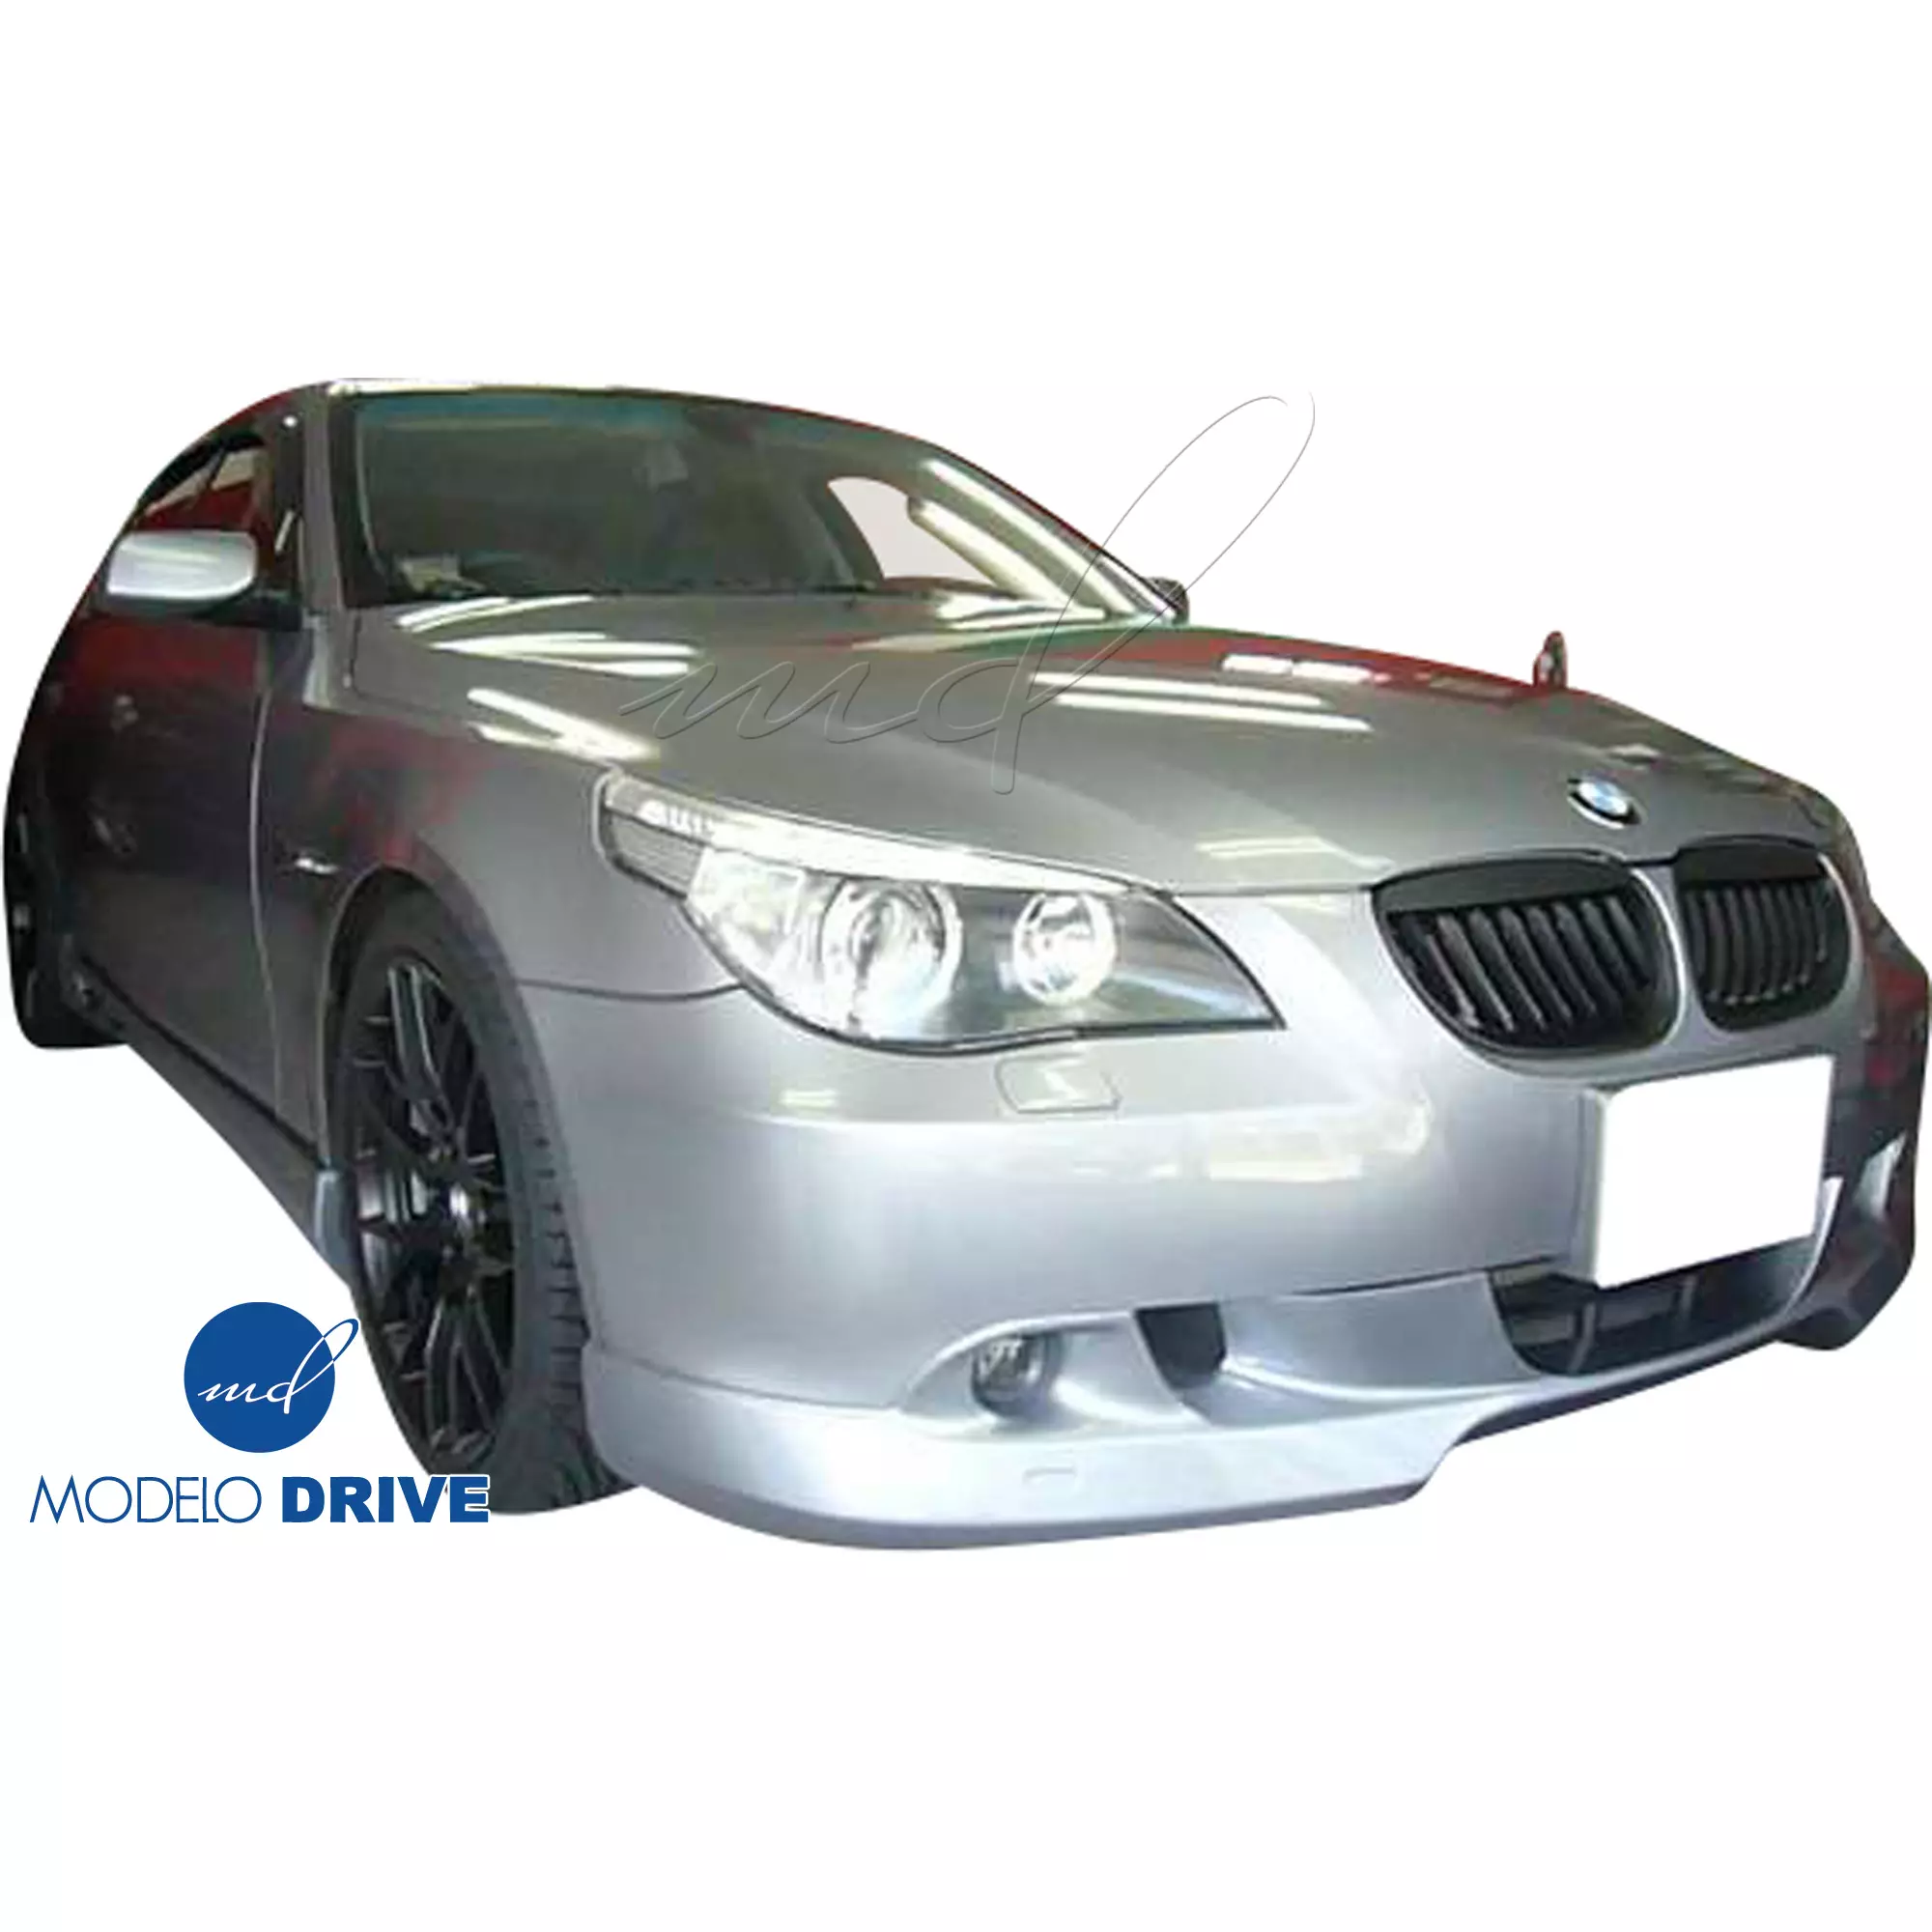 ModeloDrive FRP ASCH Front Valance Add-on > BMW 5-Series E60 2004-2010 > 4dr - Image 5